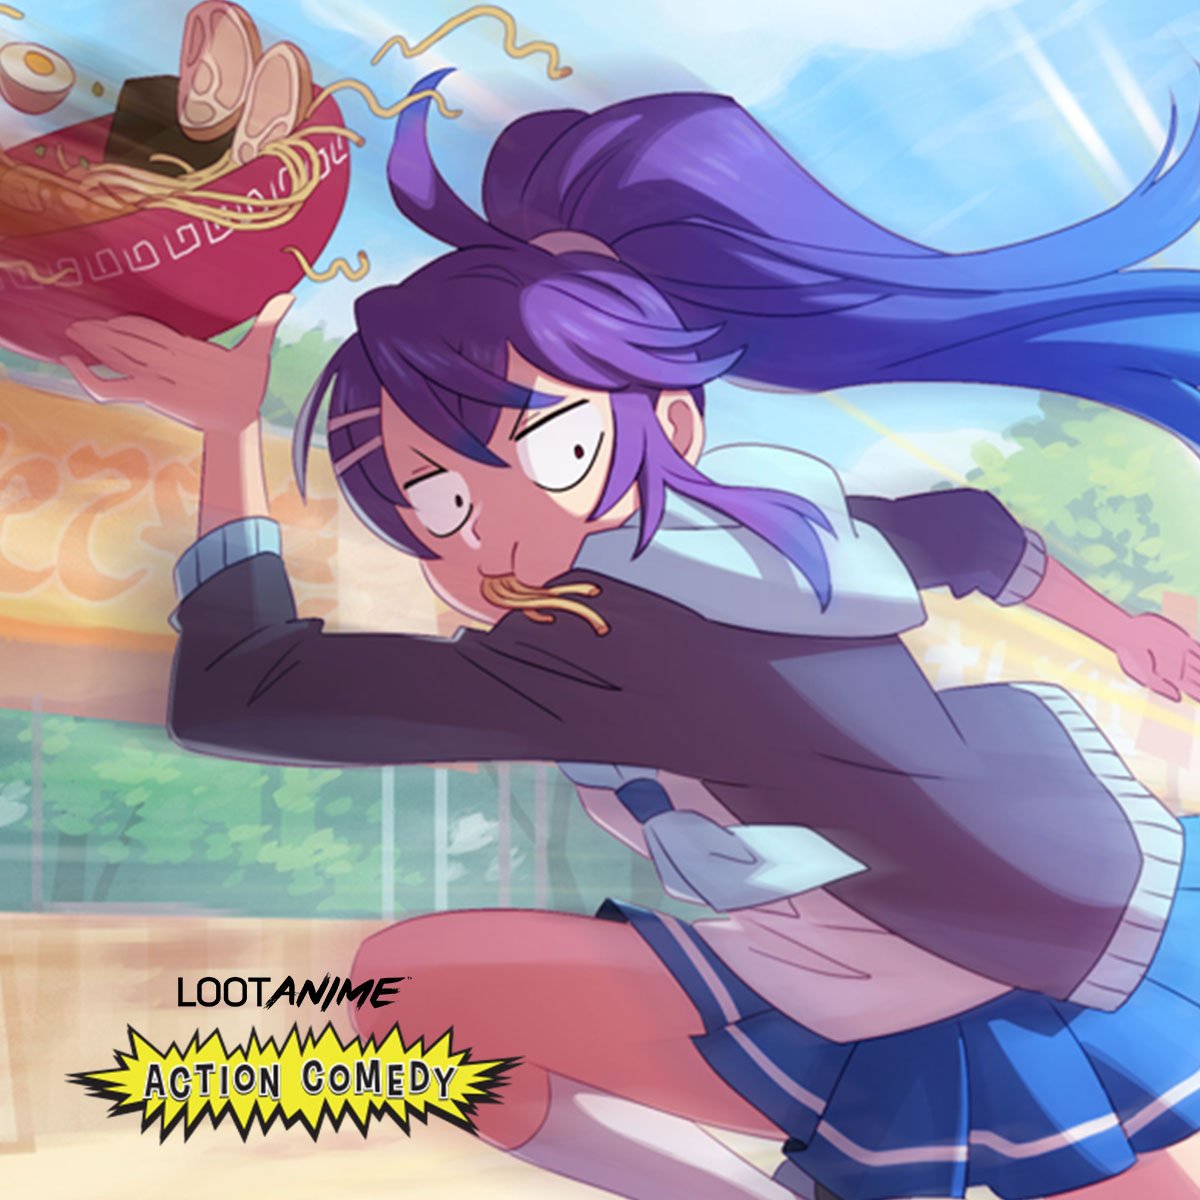 Loot Anime Episode 20: Action Comedy (Review, Spoilers) - NerdSpan